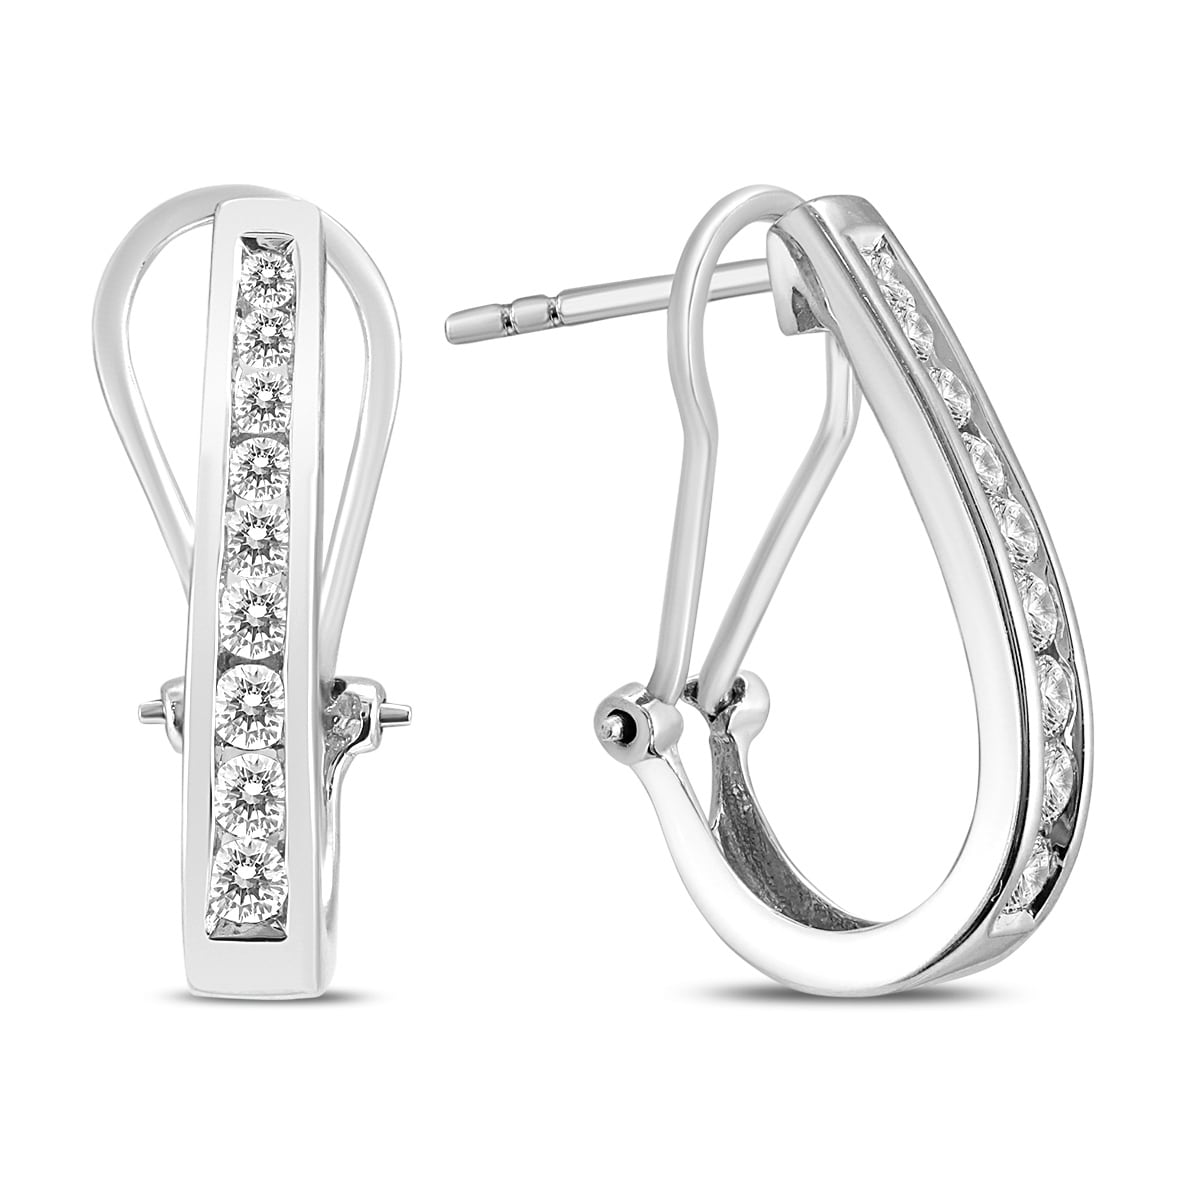 1 2 Carat Tw Channel Set Diamond Omega Back Hoop Earrings In White Gold H I Color Si1 Si2 Clarity On Sale Overstock